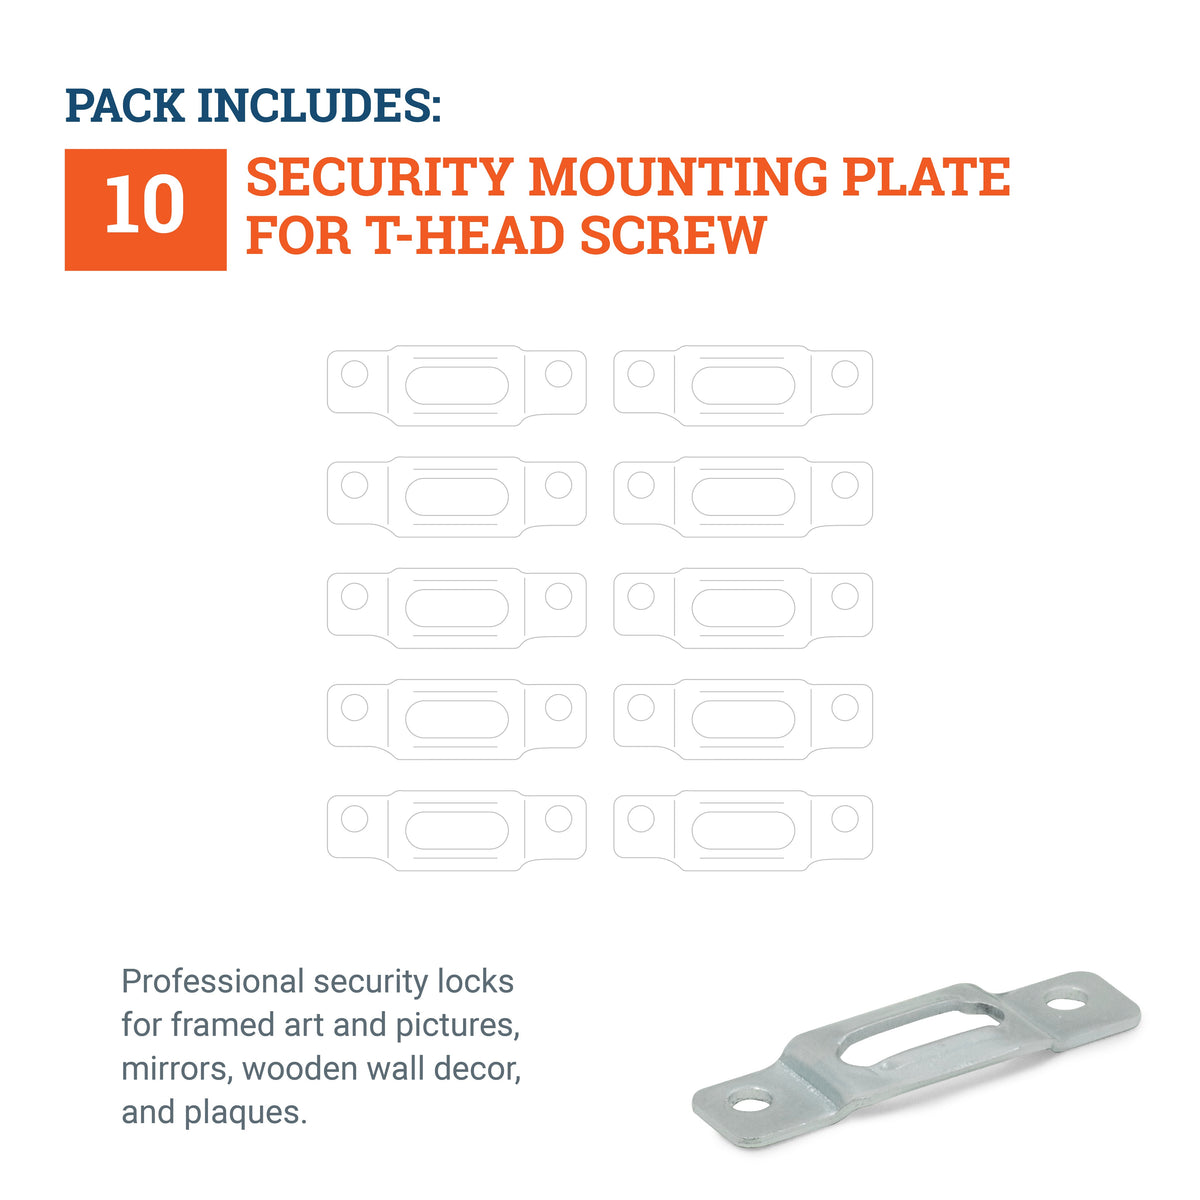 Security Mounting Plate for T-Head Screw - 10 Pack ($0.34